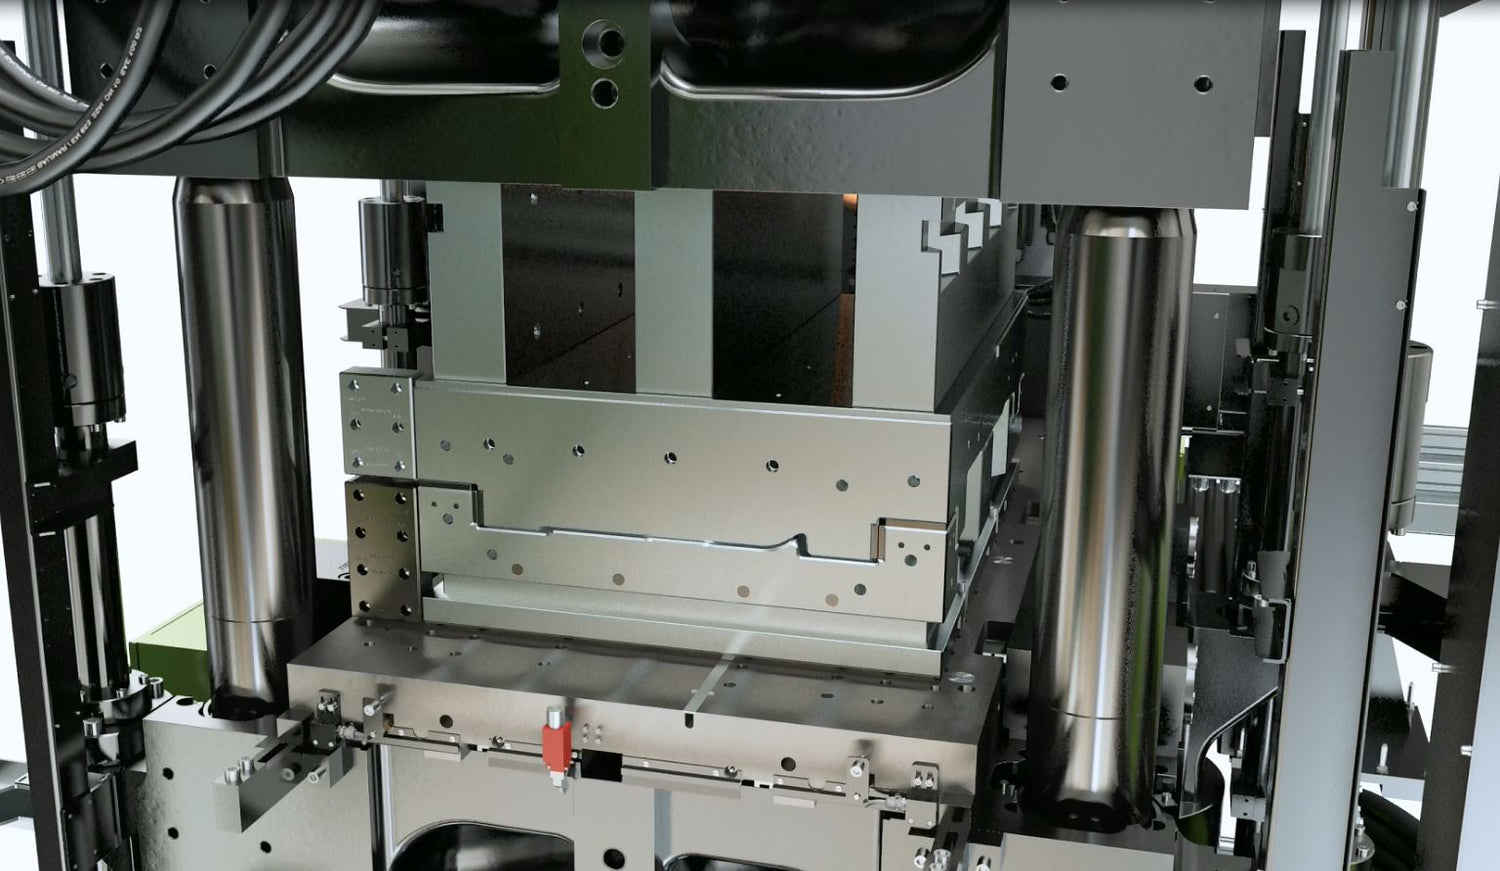 Engel Press for specialist composites manufacturing